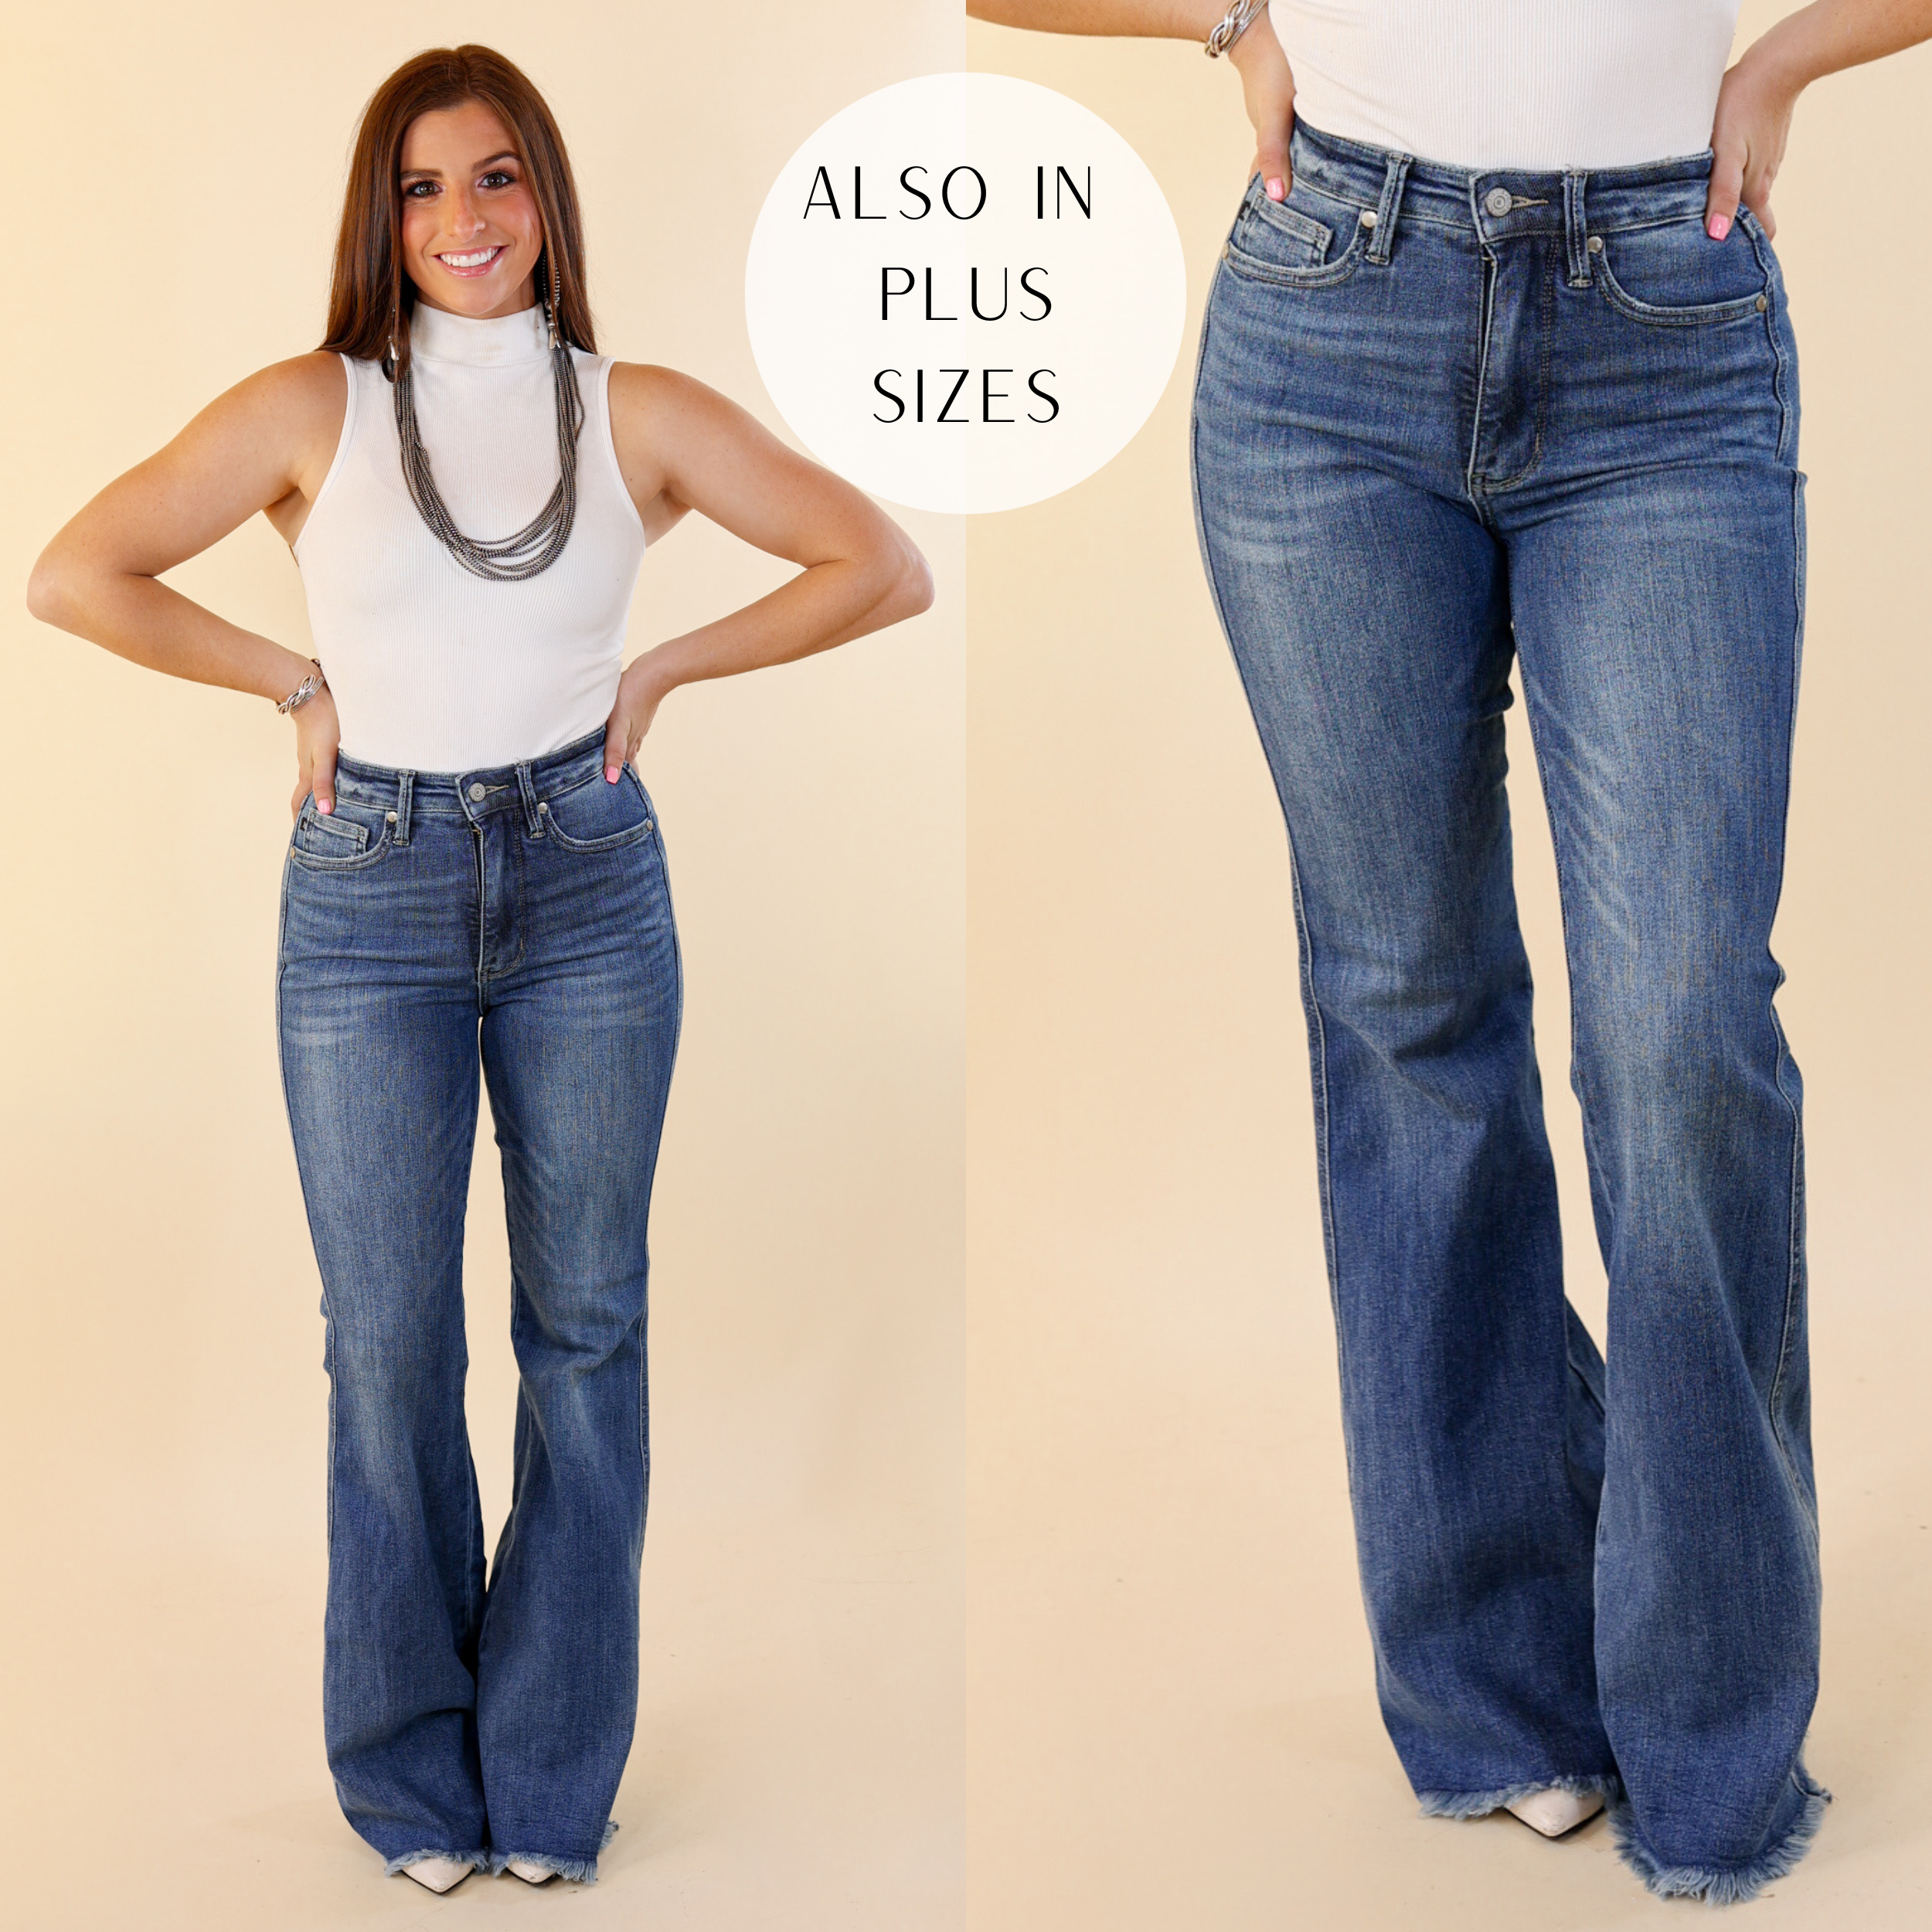 Model is wearing a pair of flare jeans in medium wash with a raw hem. Model has it paired with a white tank top, silver jewelry, and white booties.